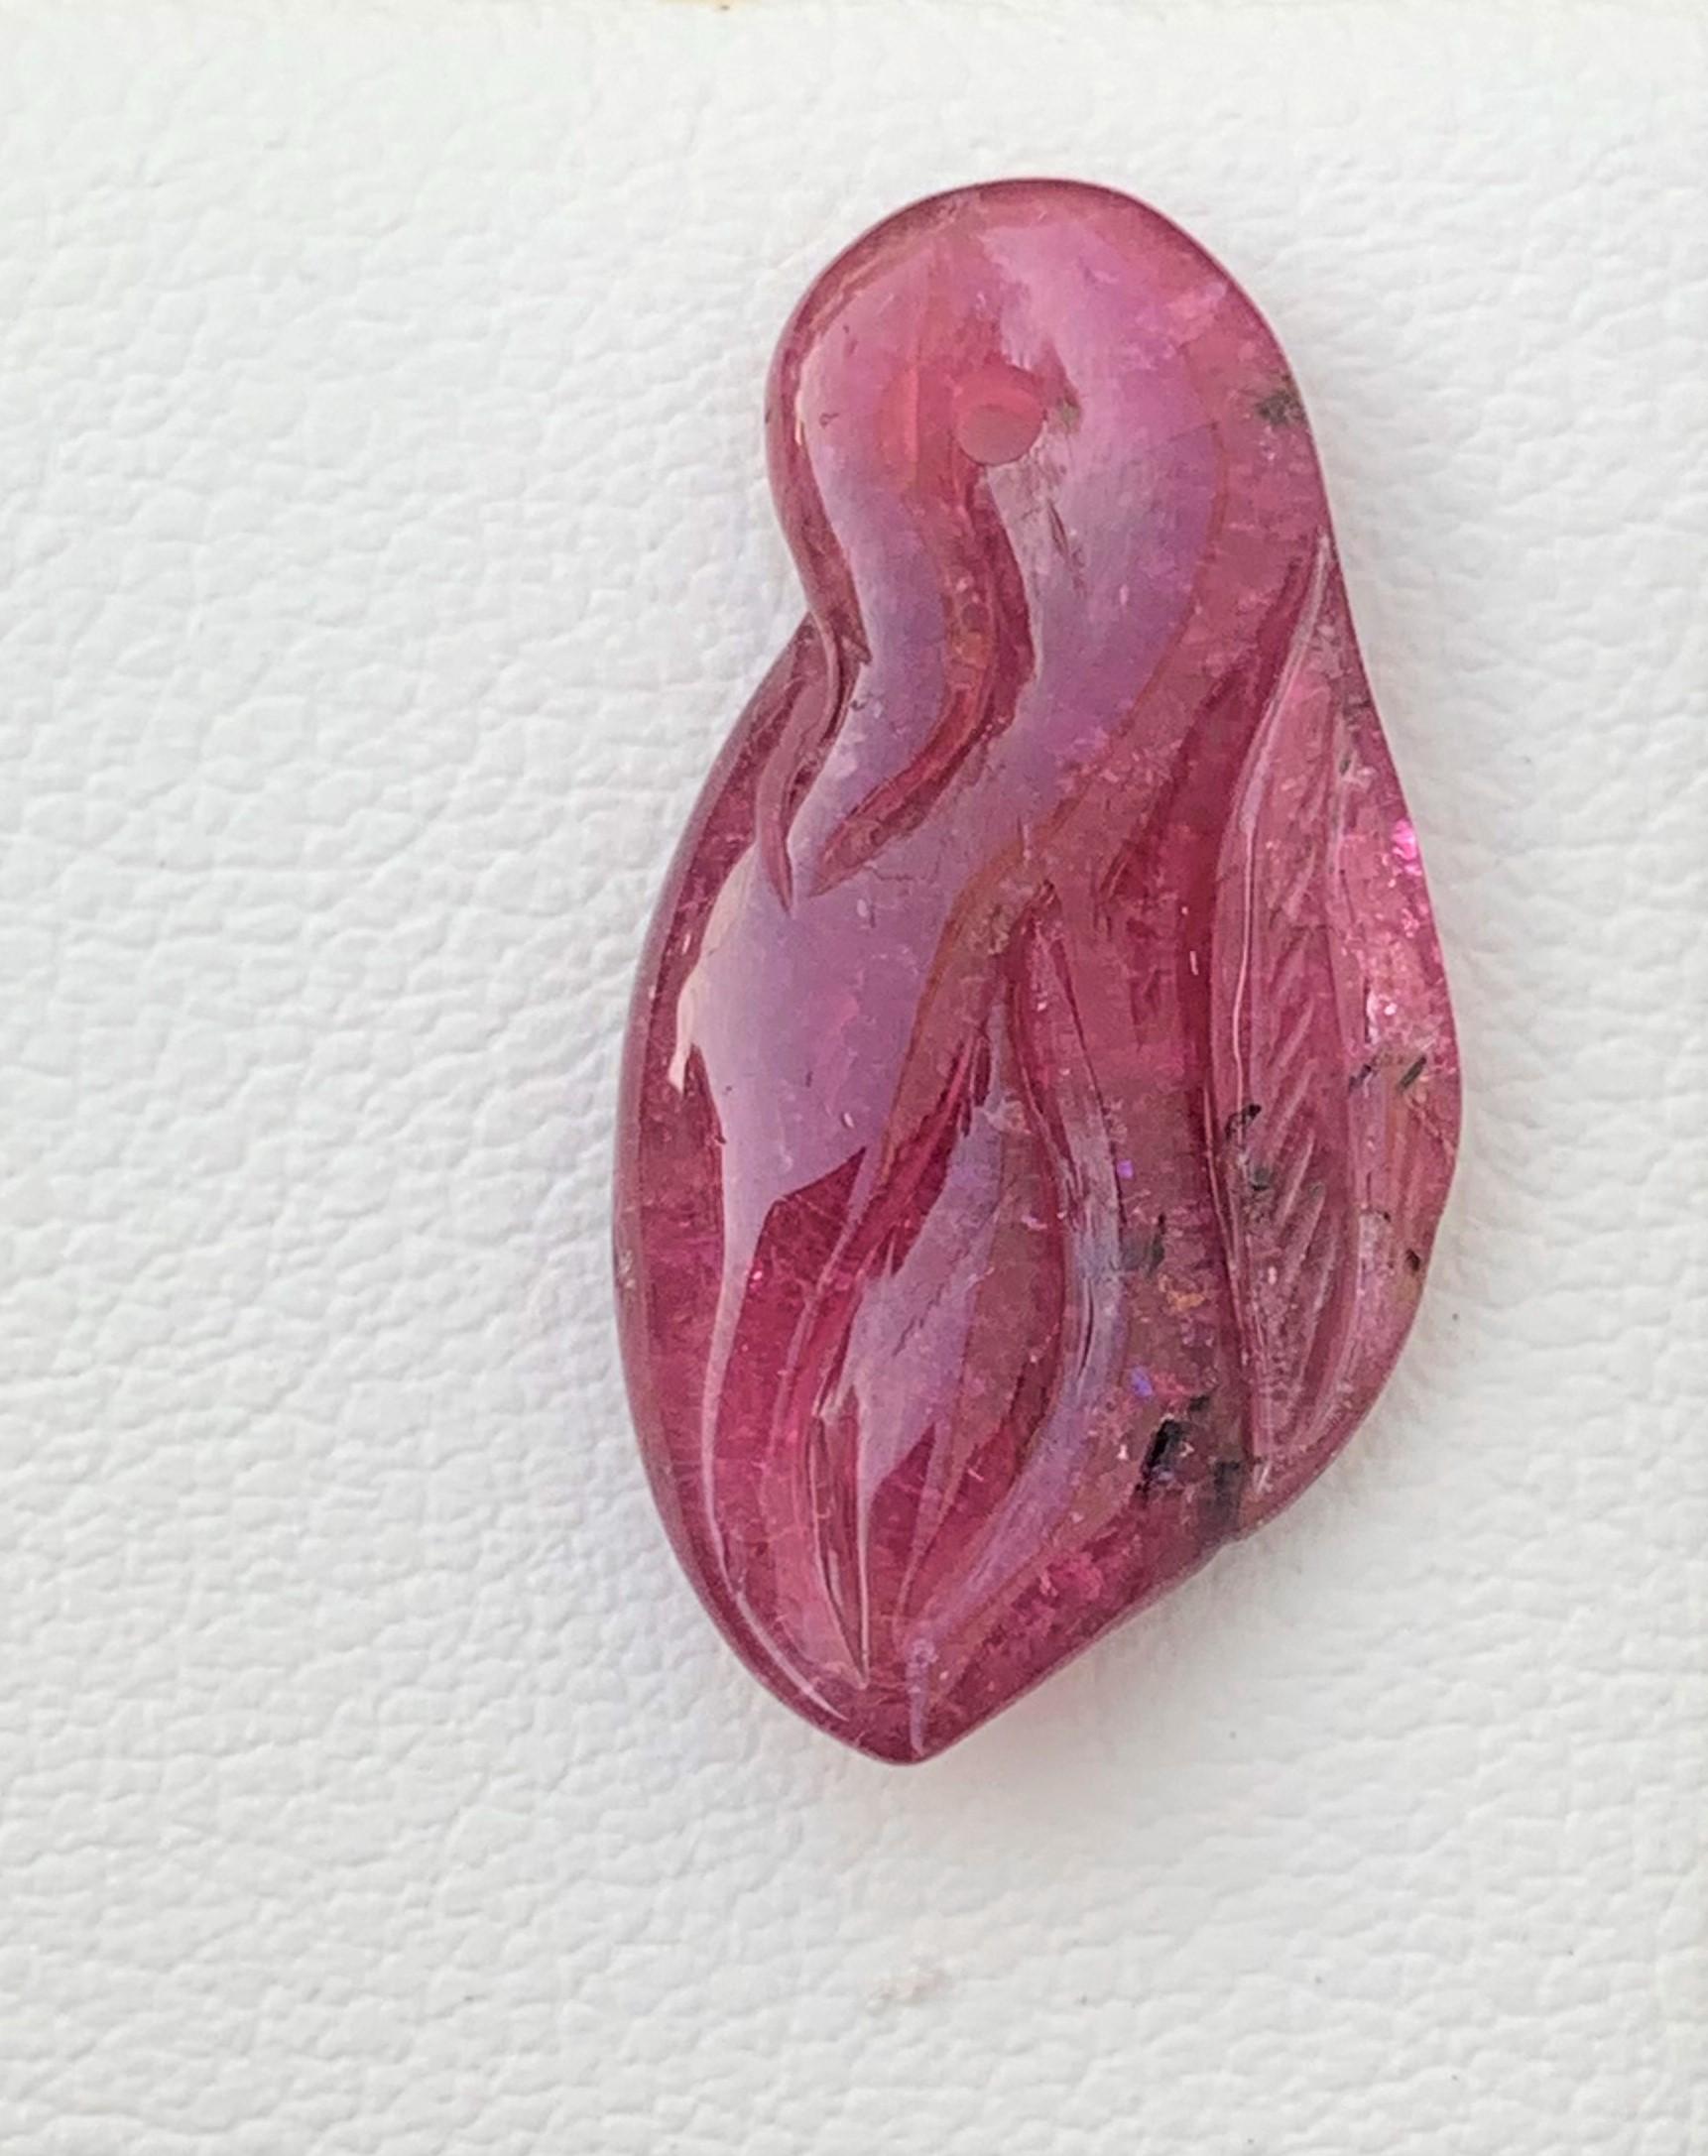 Malagasy 13.70 Carat Glamorous Rubellite Tourmaline Drilled Craving from Africa For Sale